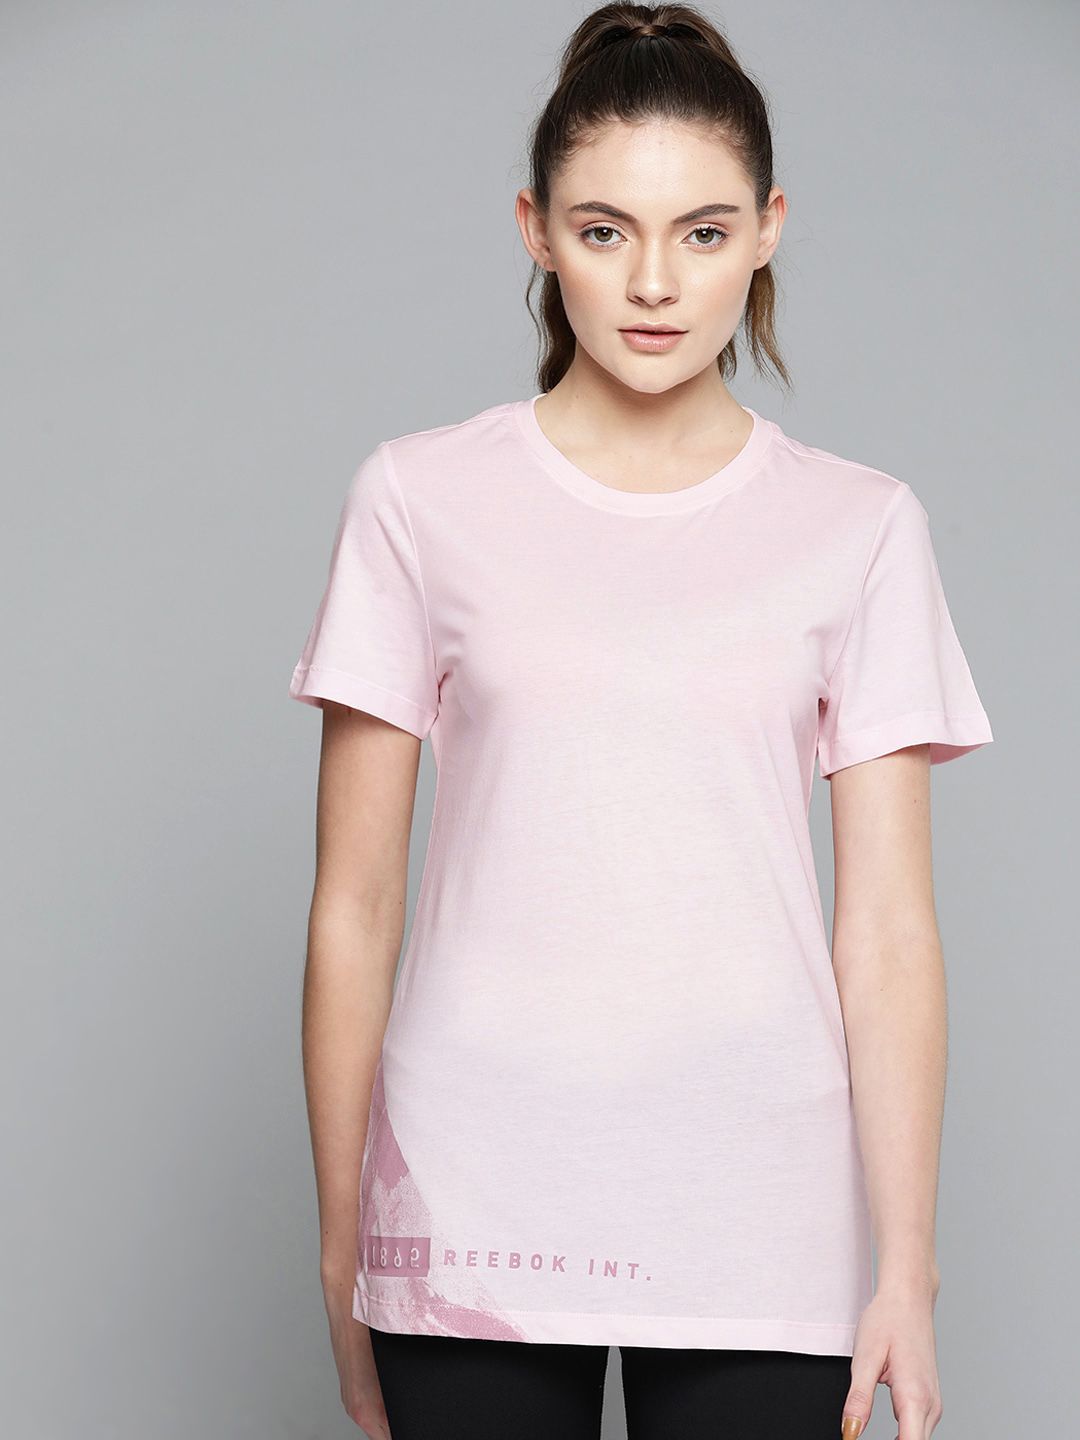 Reebok Women Pink Workout Graphic Pure Cotton T-shirt Price in India